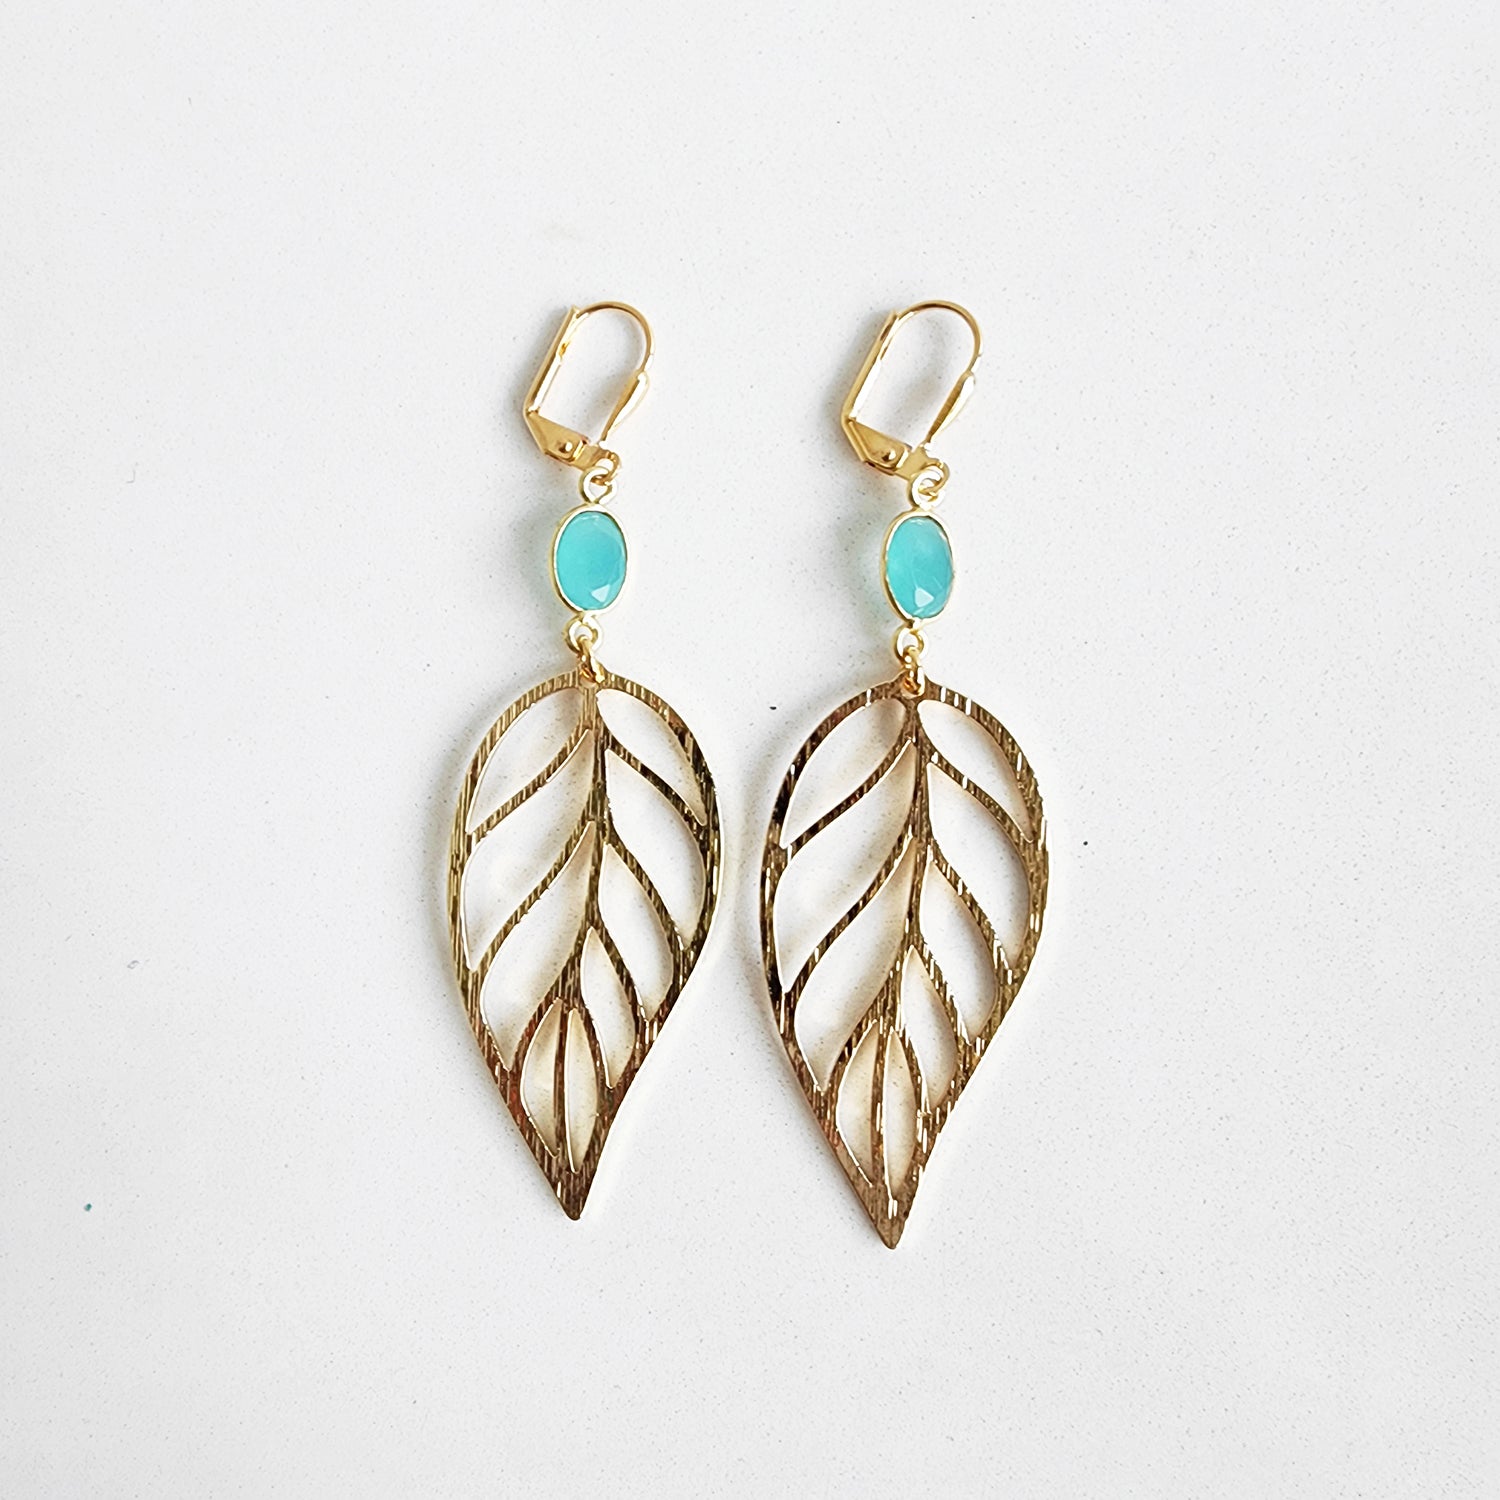 THE DAPHNE Turquoise Ginkgo Leaf Statement Earrings – Soli & Sun